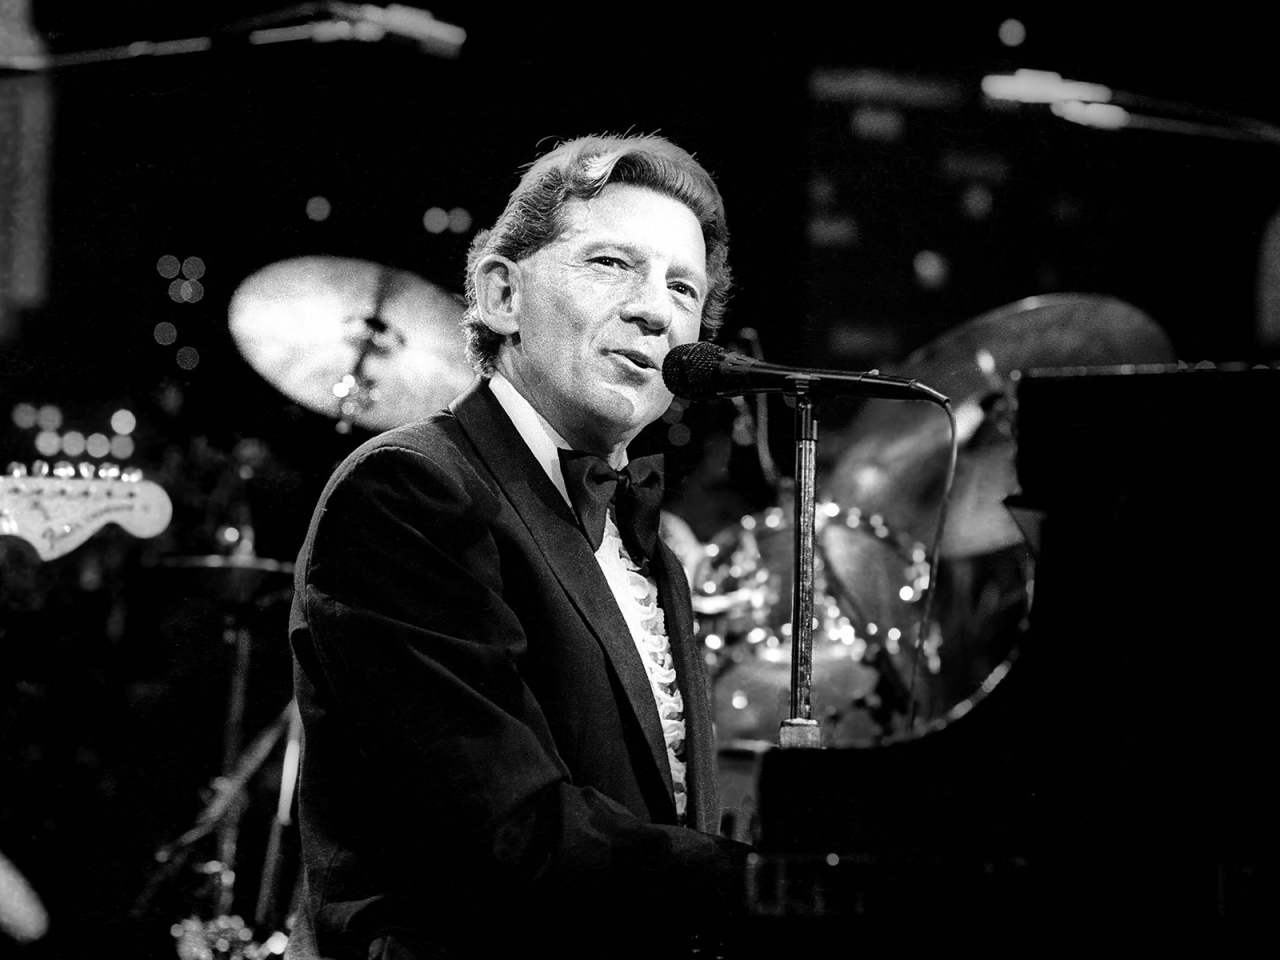 Jerry Lee Lewis for 1280 x 960 resolution